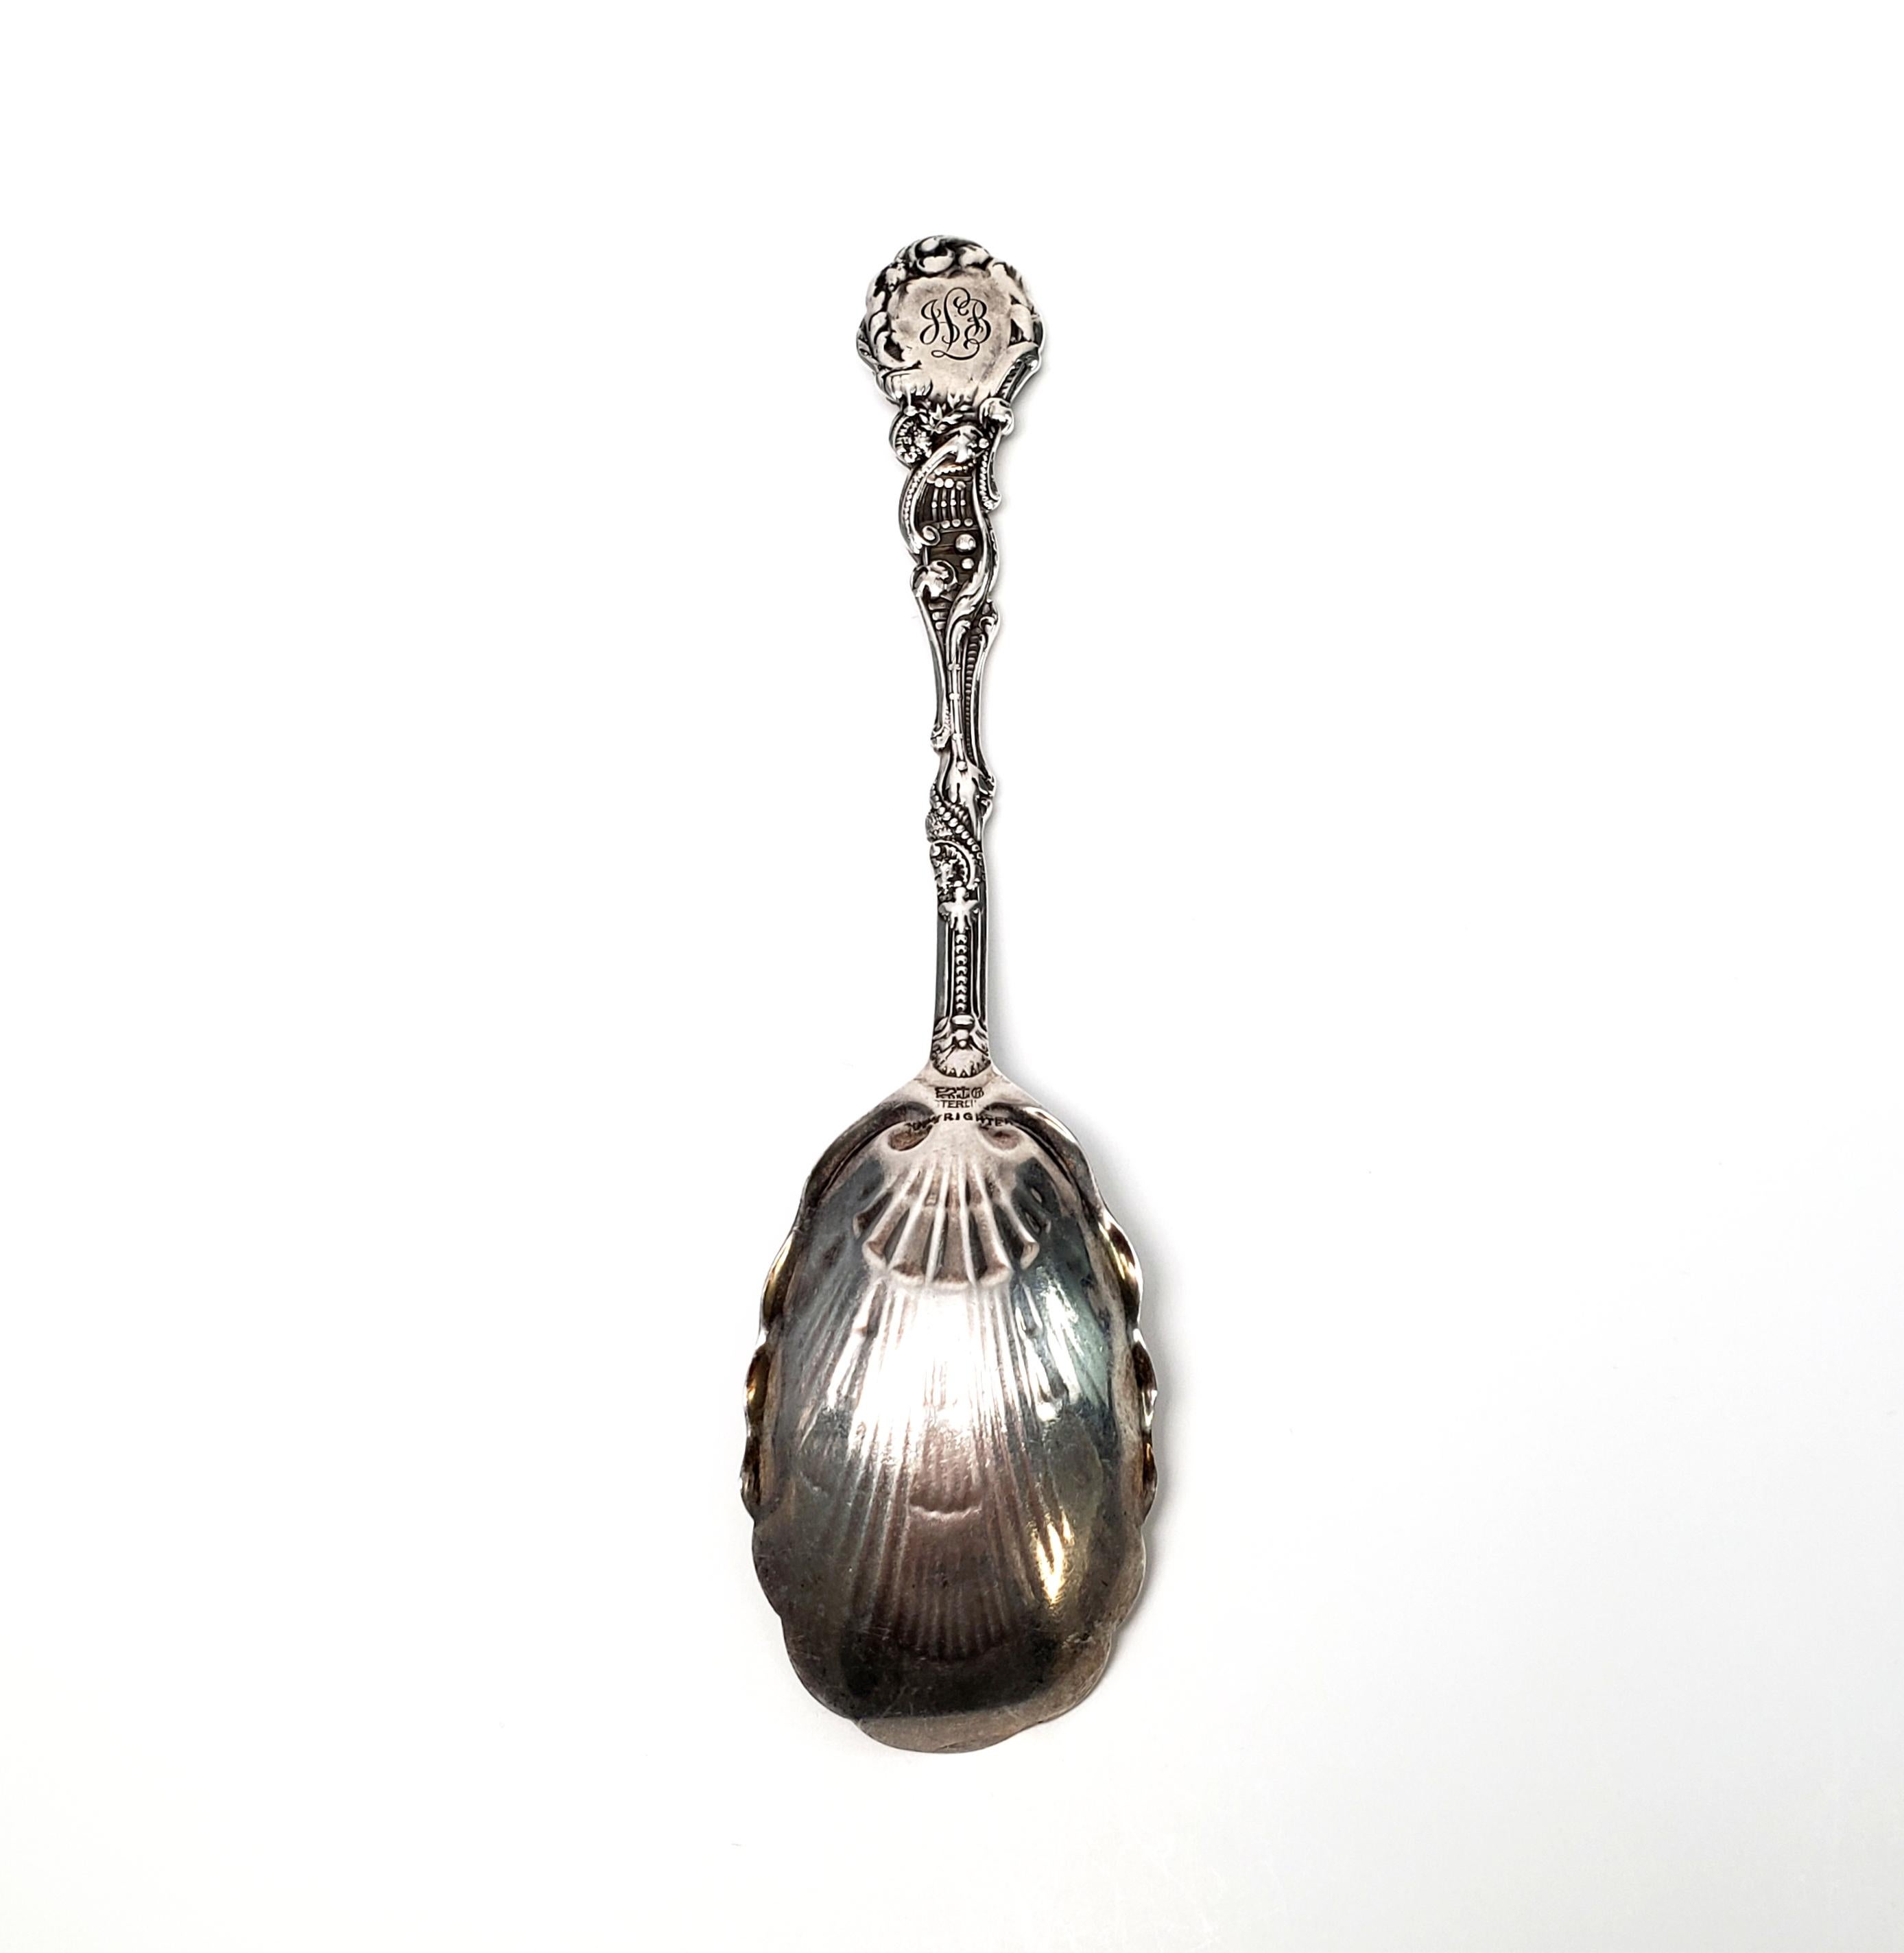 Antique sterling silver sugar shell spoon by Gorham in the Versailles pattern with a gold washed bowl, with monogram.

Gorham's Versailles is a multi motif pattern designed by Antone Heller in 1885. Named for the Palace of Versailles, the pattern